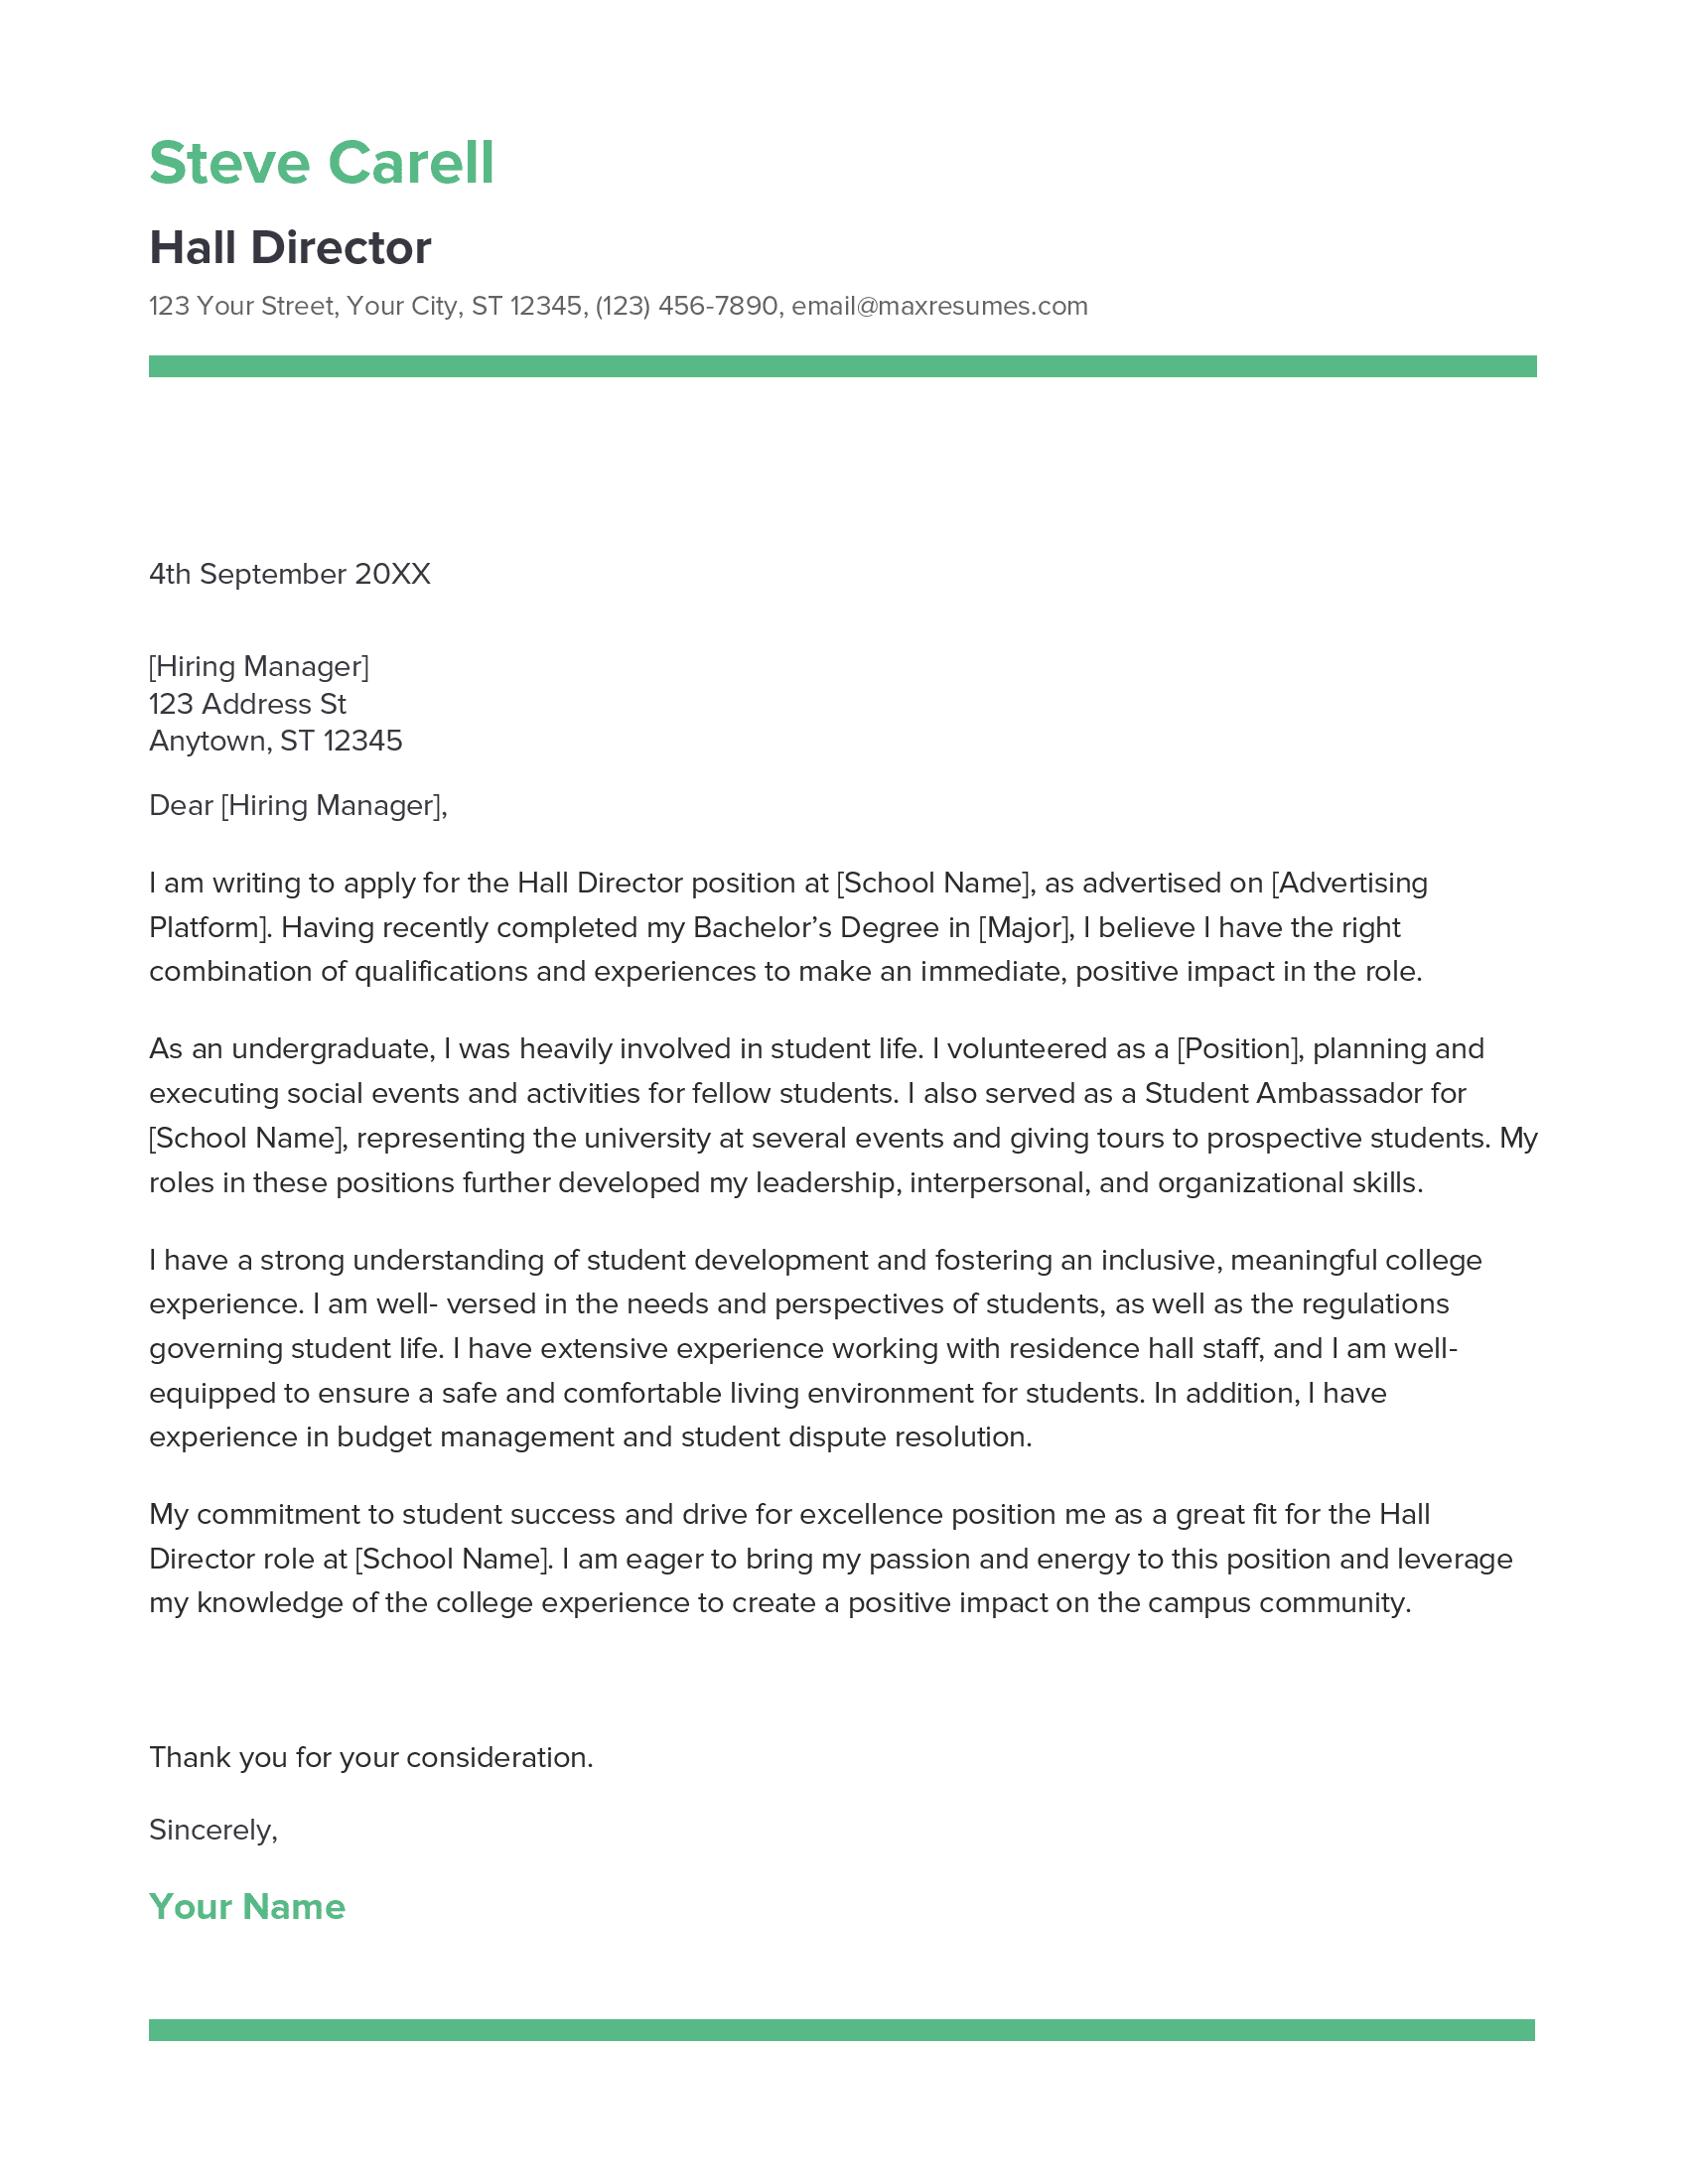 Hall Director Cover Letter Example